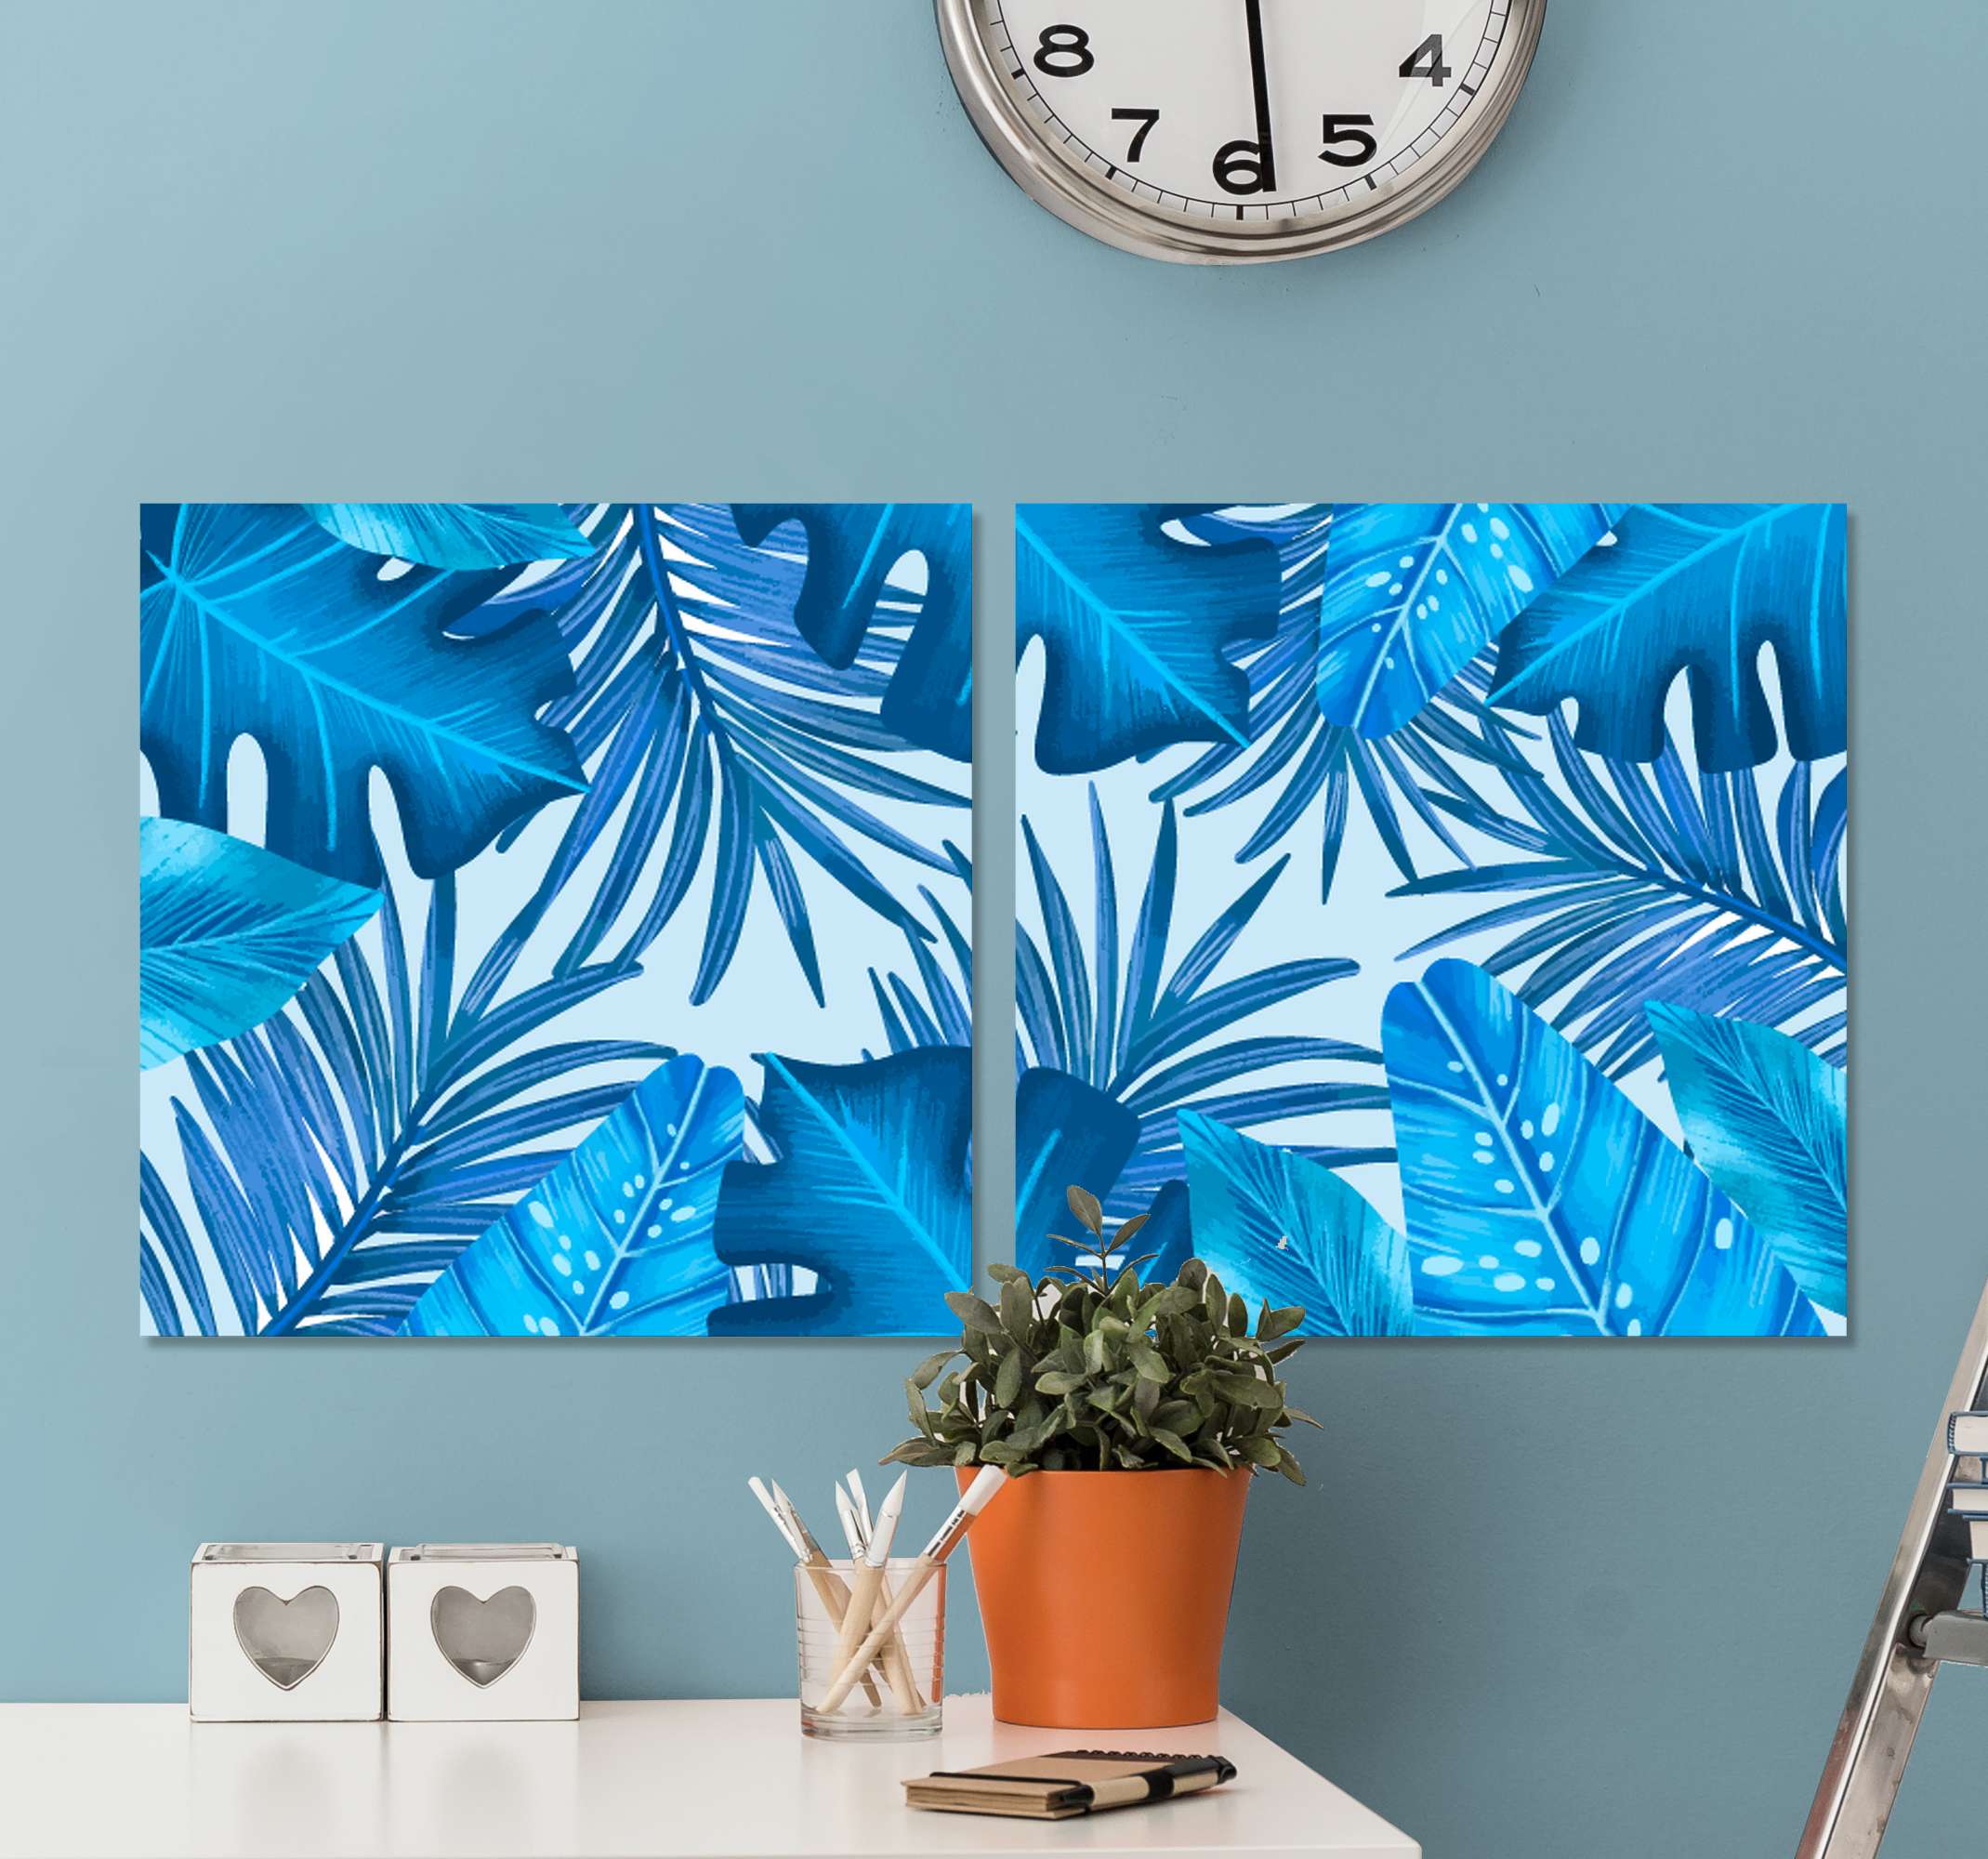 Dark Blue Palm Leaves Wallpaper wall mural  ColorayDecorcom